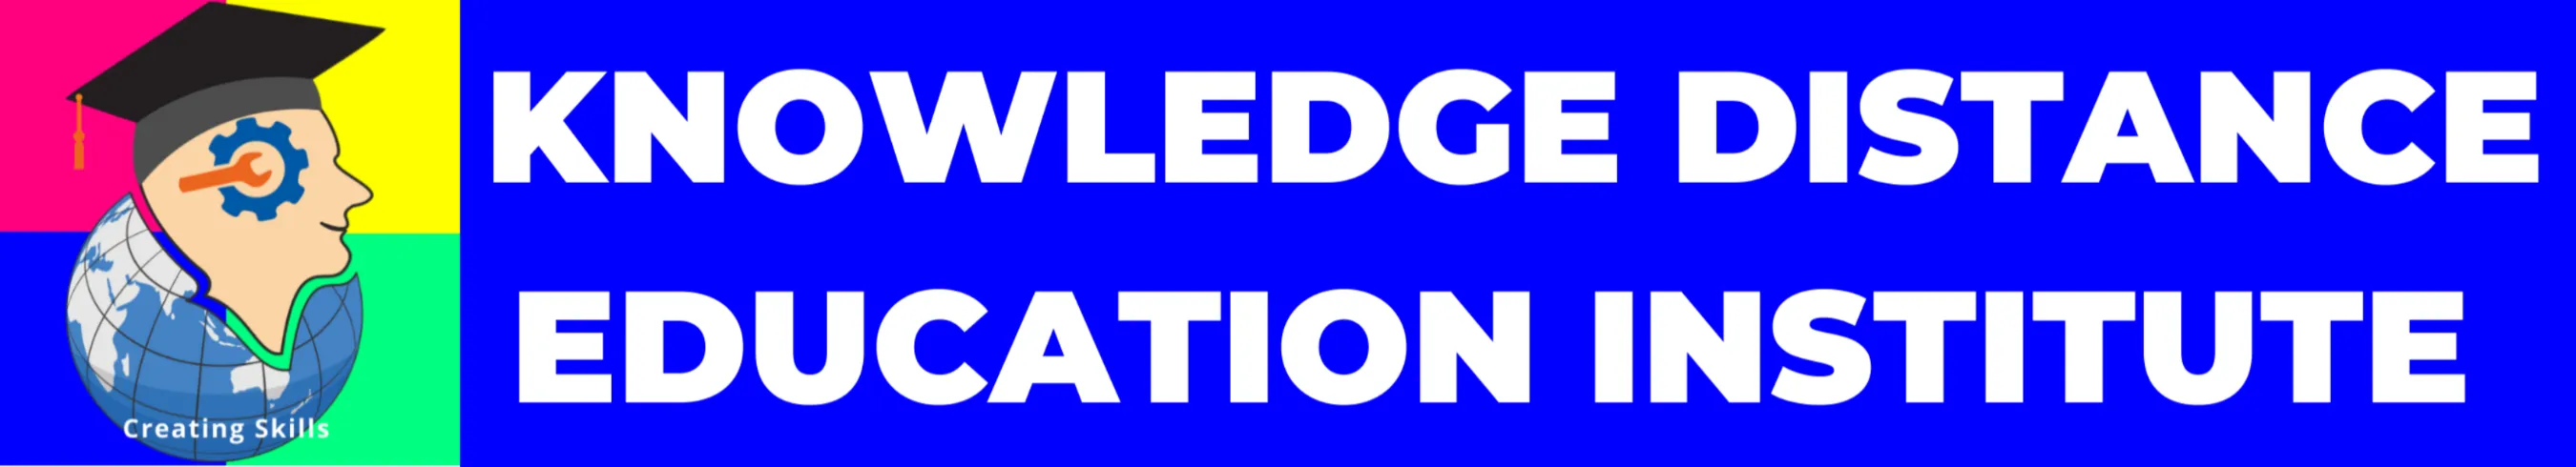 Knowledge Distance Education Institute Logo